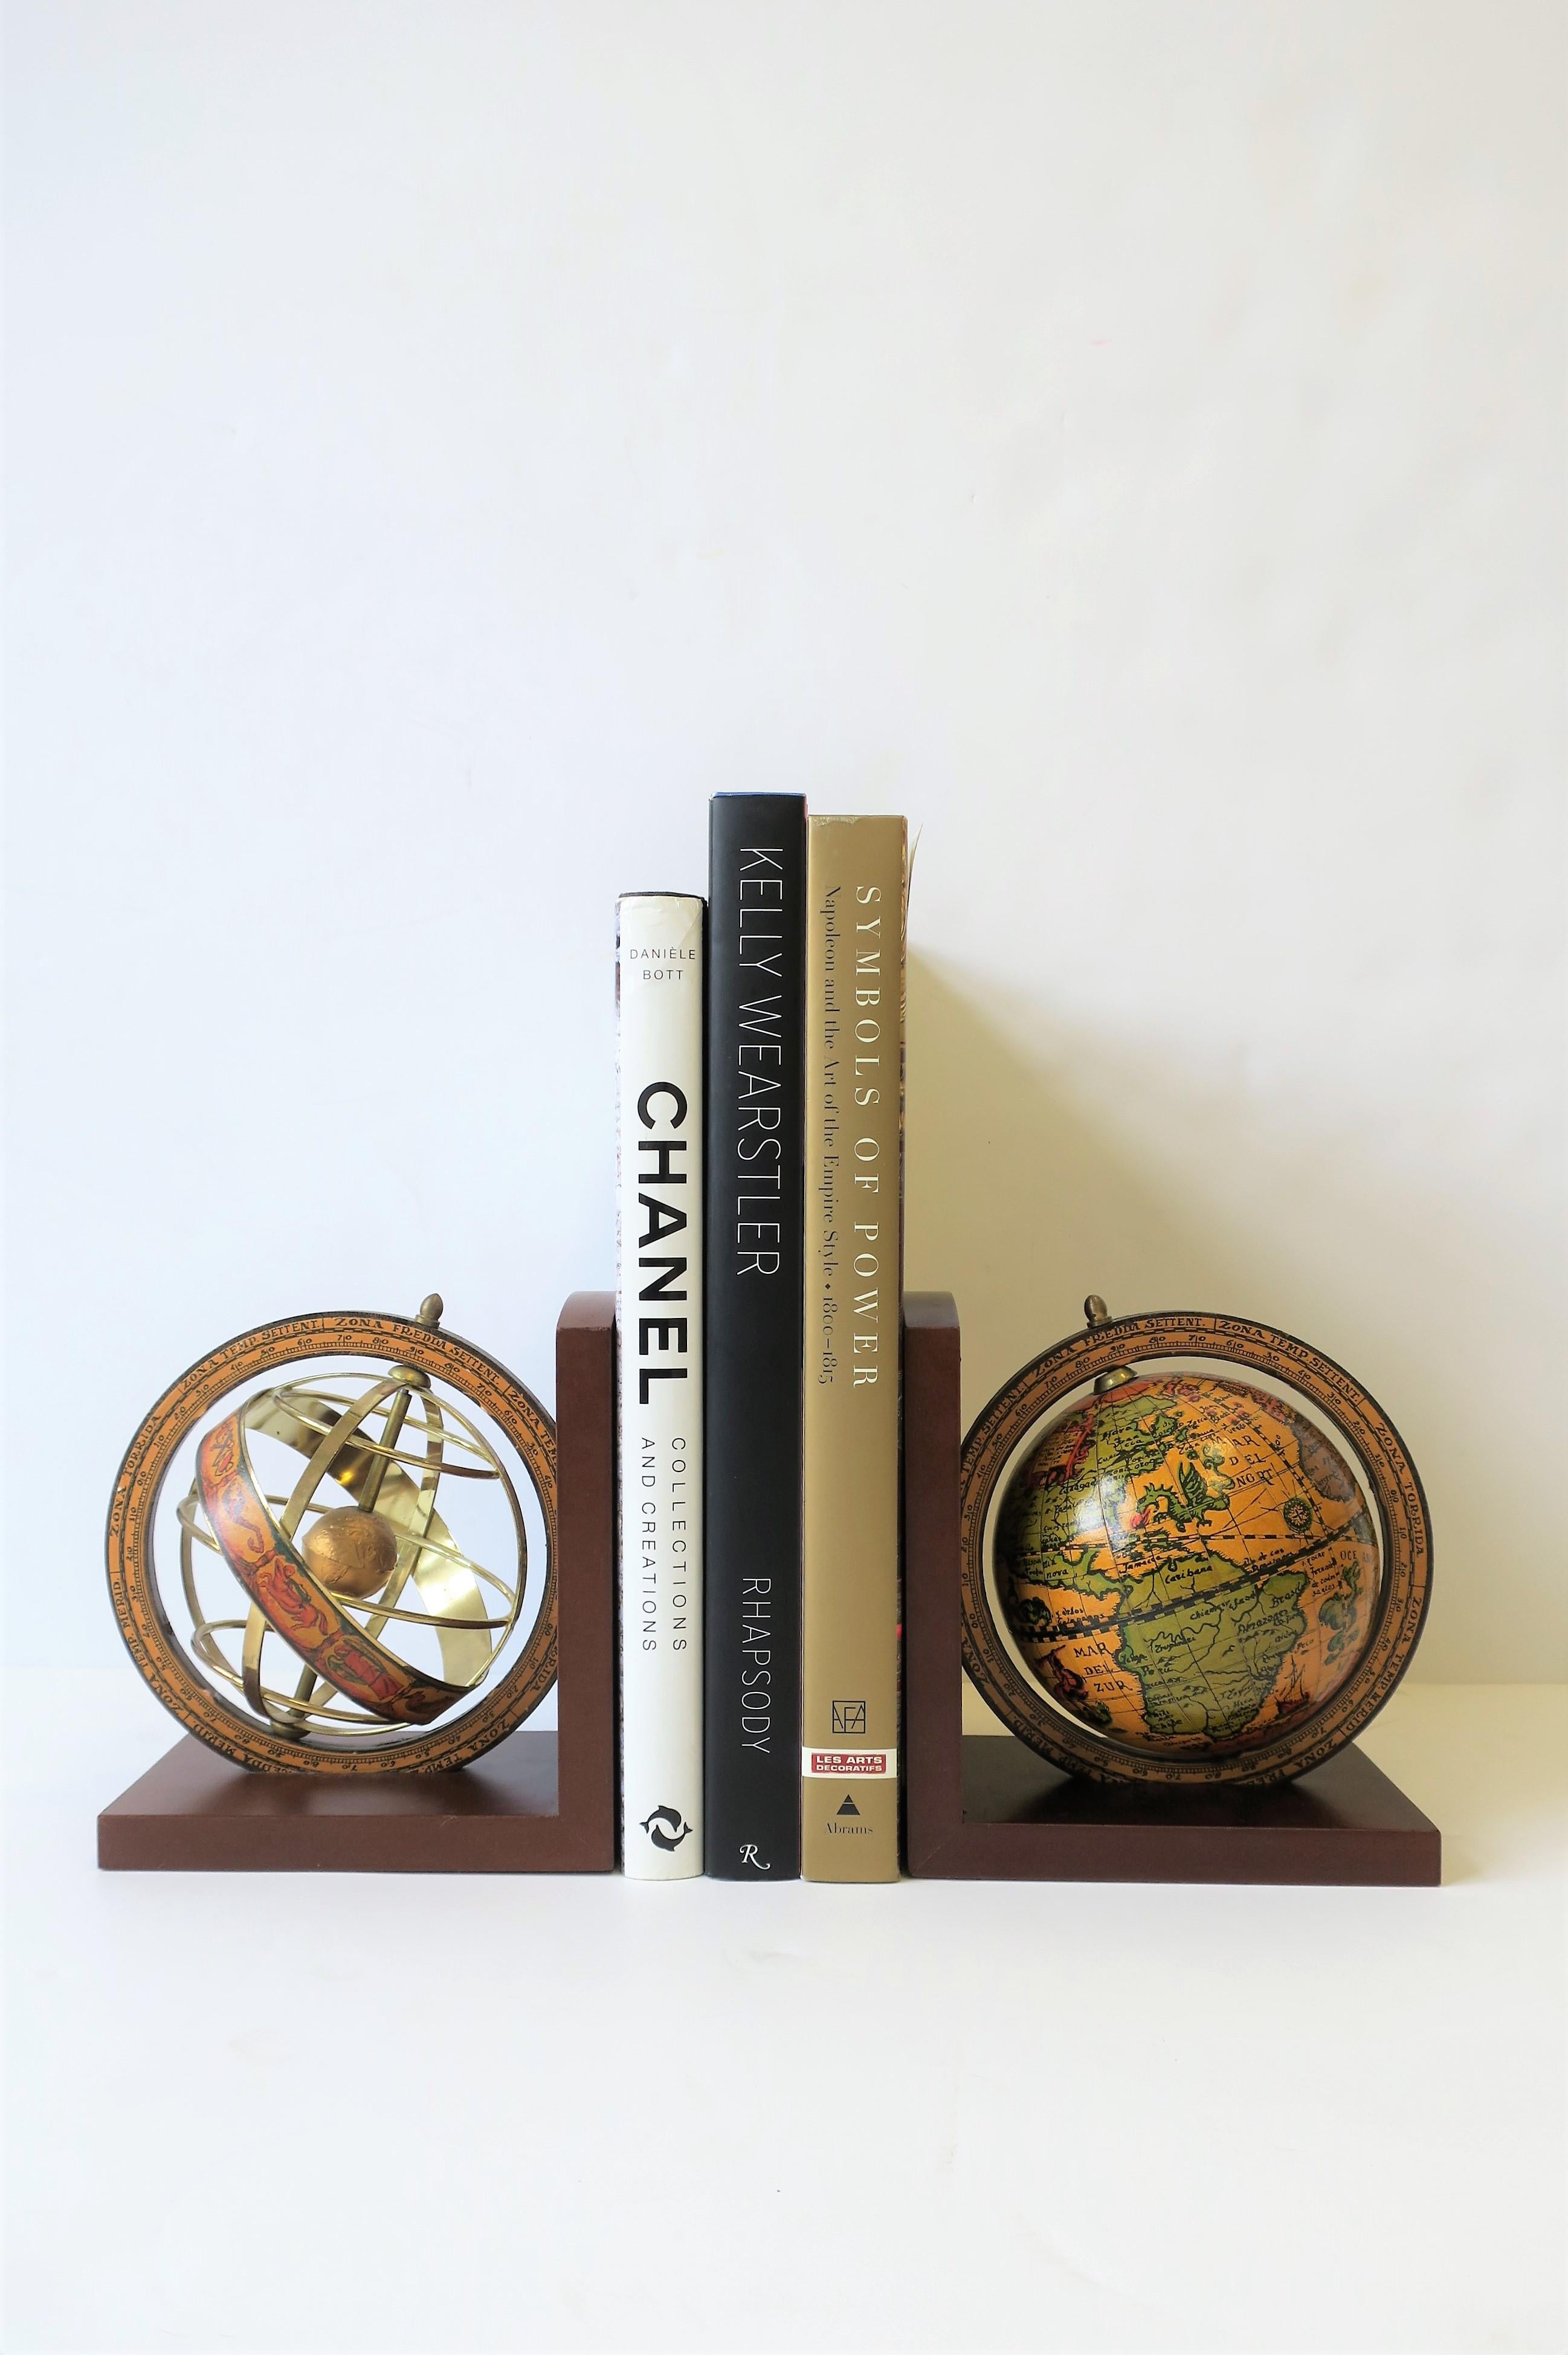 A pair of midcentury Italian world globe bookends, made in Italy. Bookends are brass, wood and paper with unique cut-out design with mini globe inside. Marked on bottom as show in image #6.